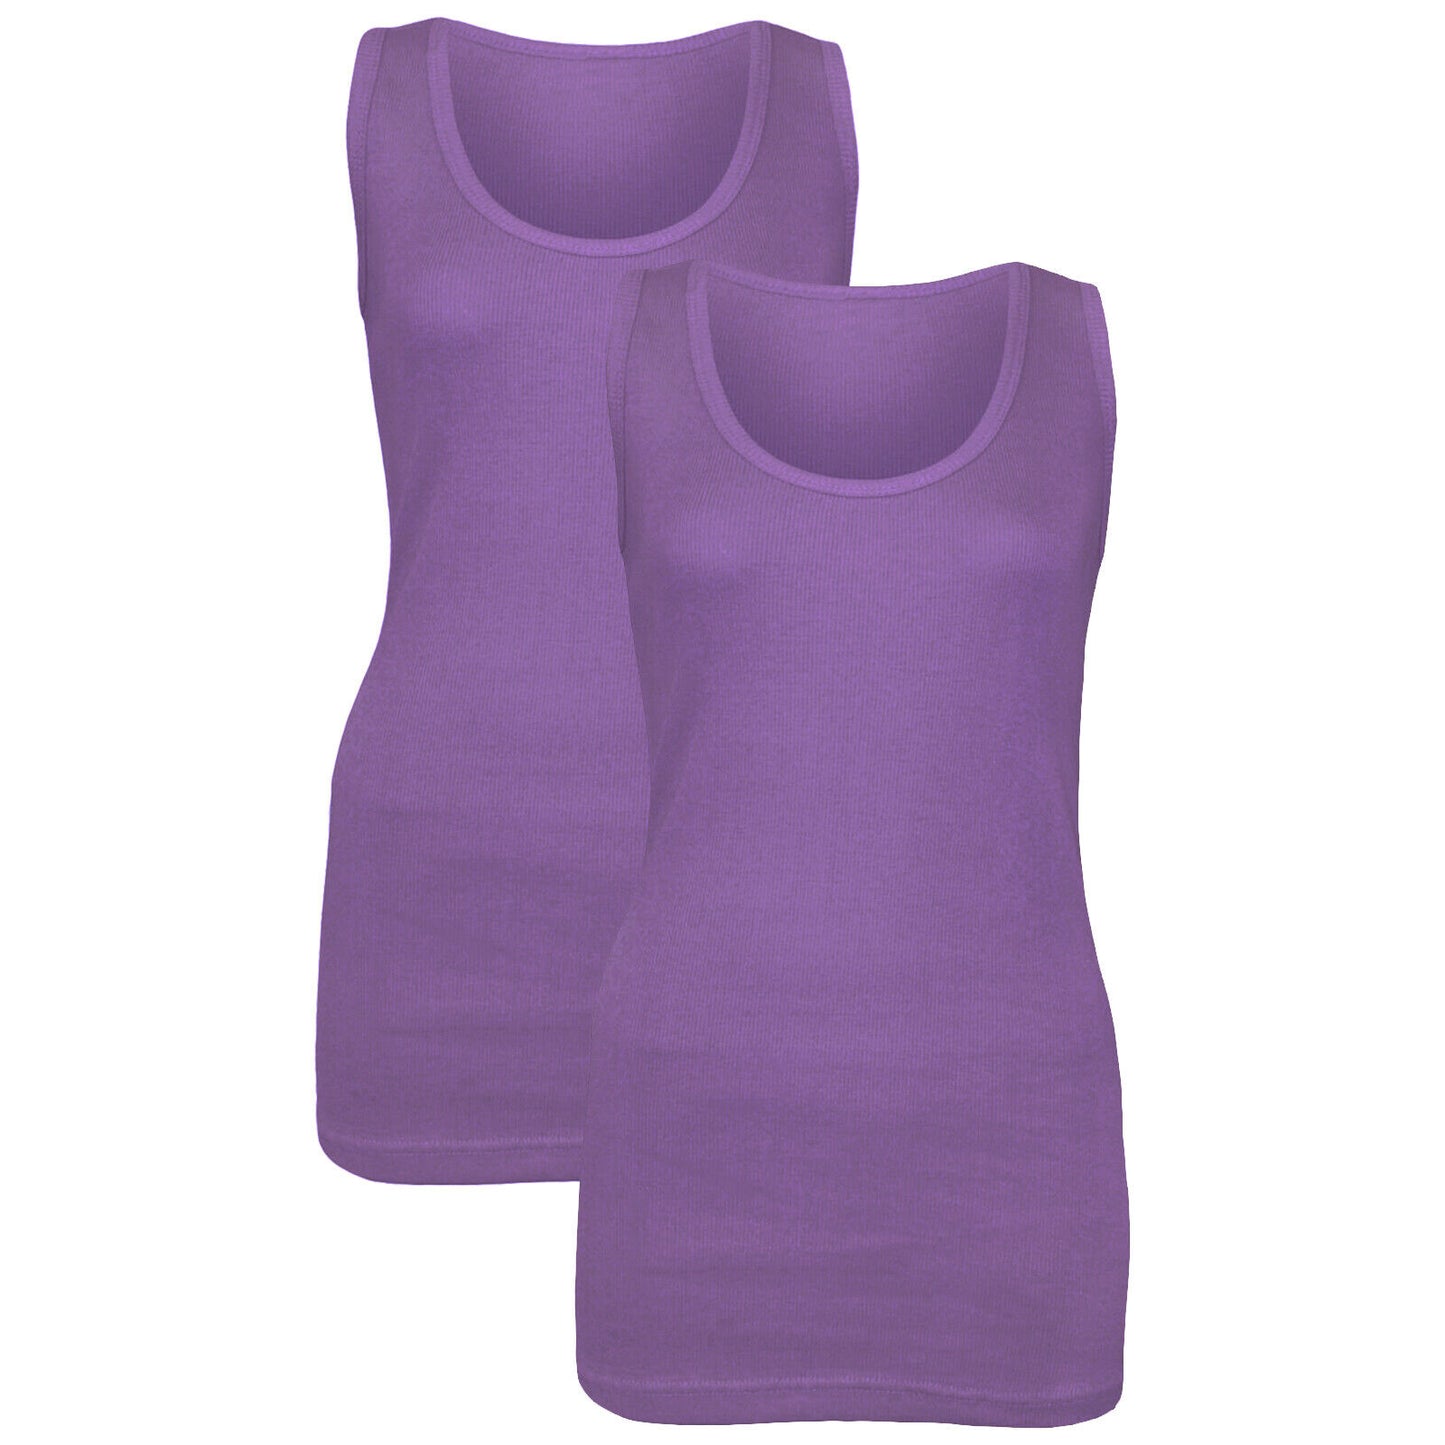 PACK OF 2 NEW LADIES WOMEN PLAIN SUMMER STRETCHY RIBBED CASUAL TOP T SHIRT VEST